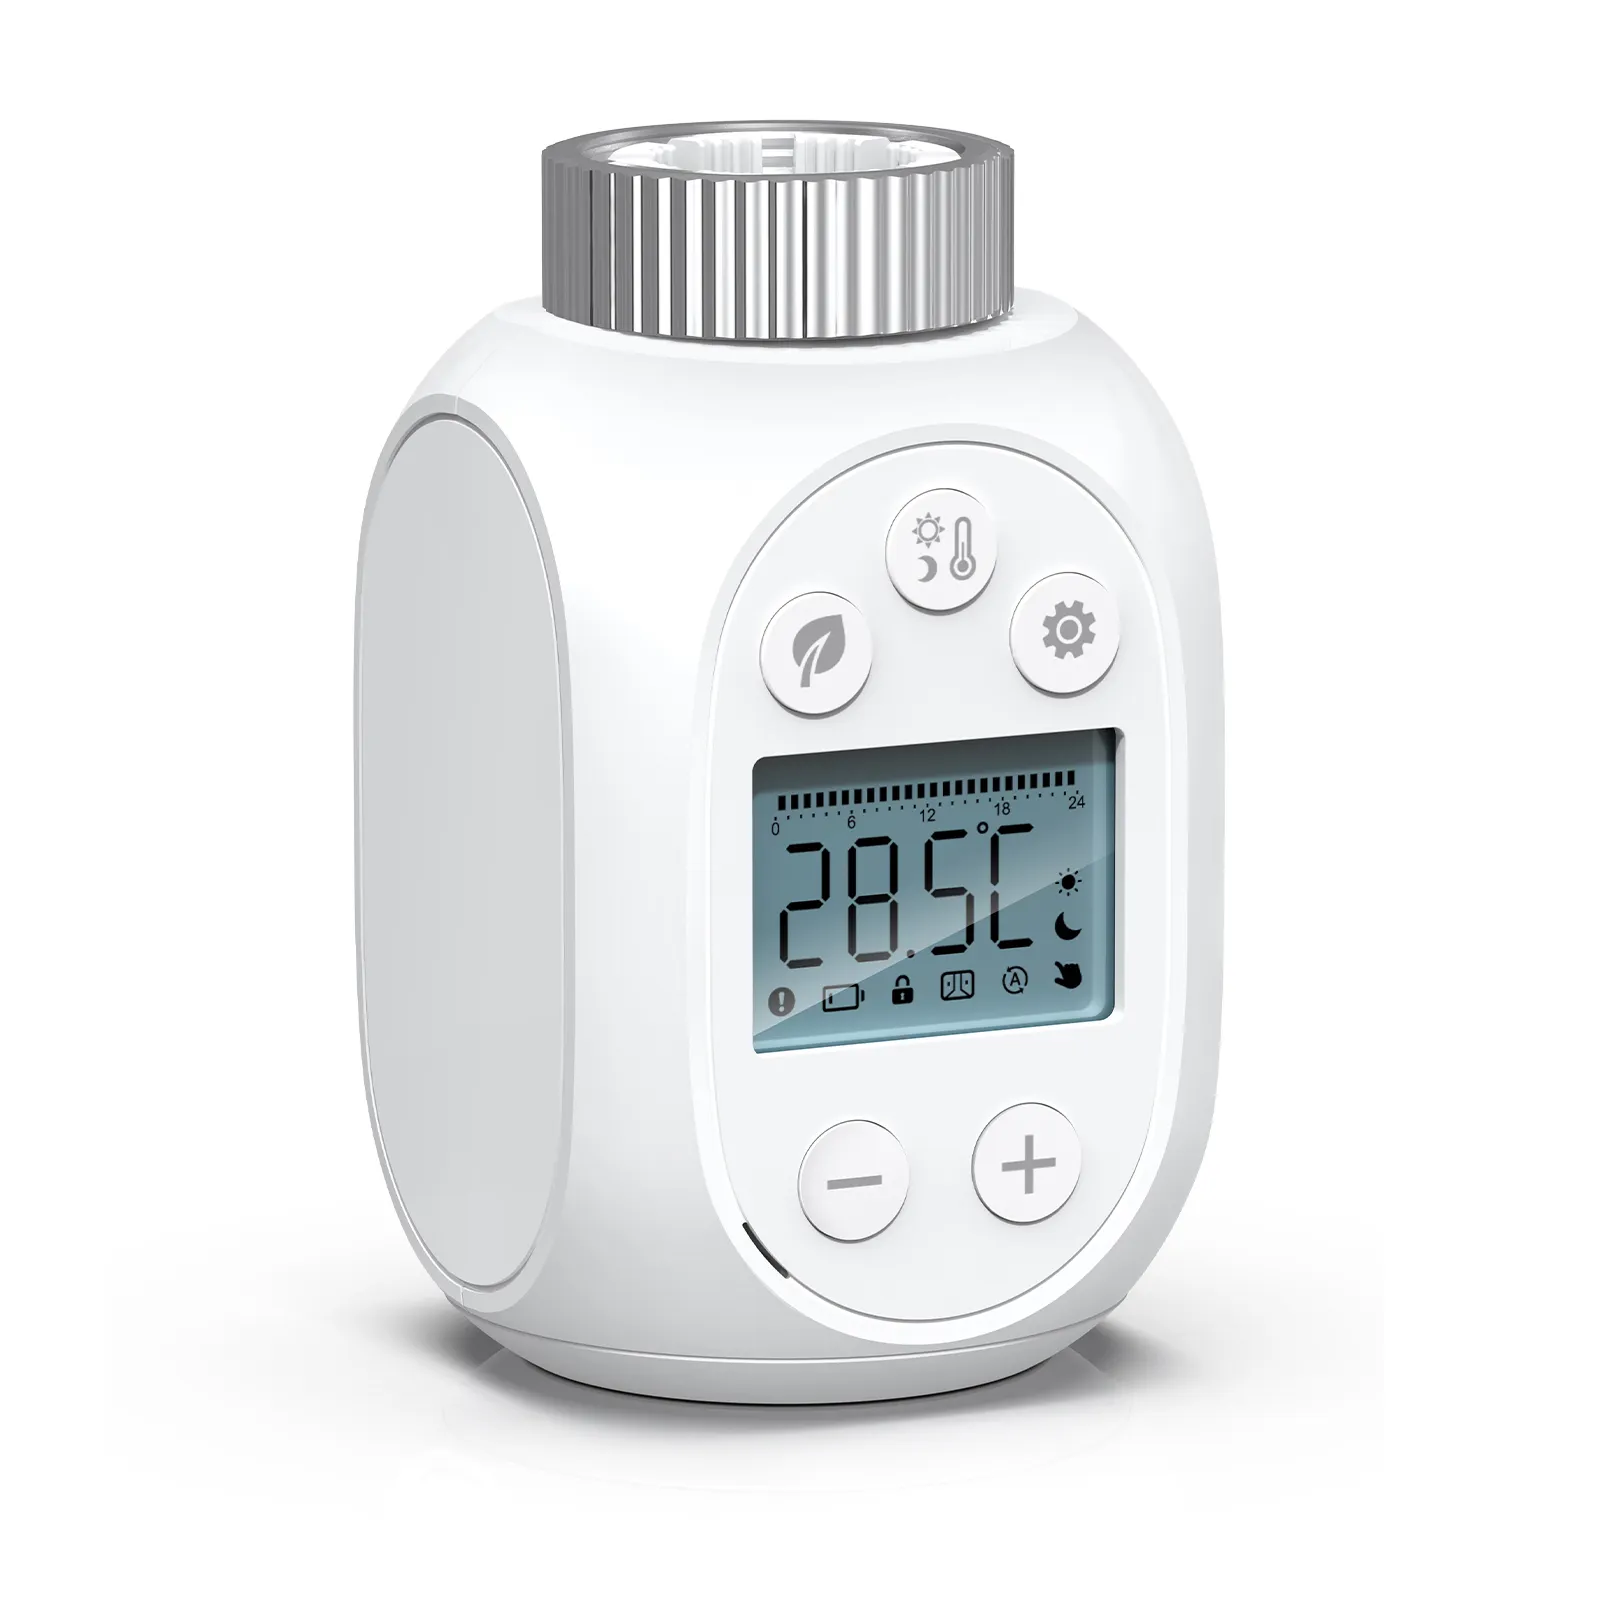 Siterwell Individual Programmable Energy-saving TRV Thermostatic Radiator Valve with LCD Screen